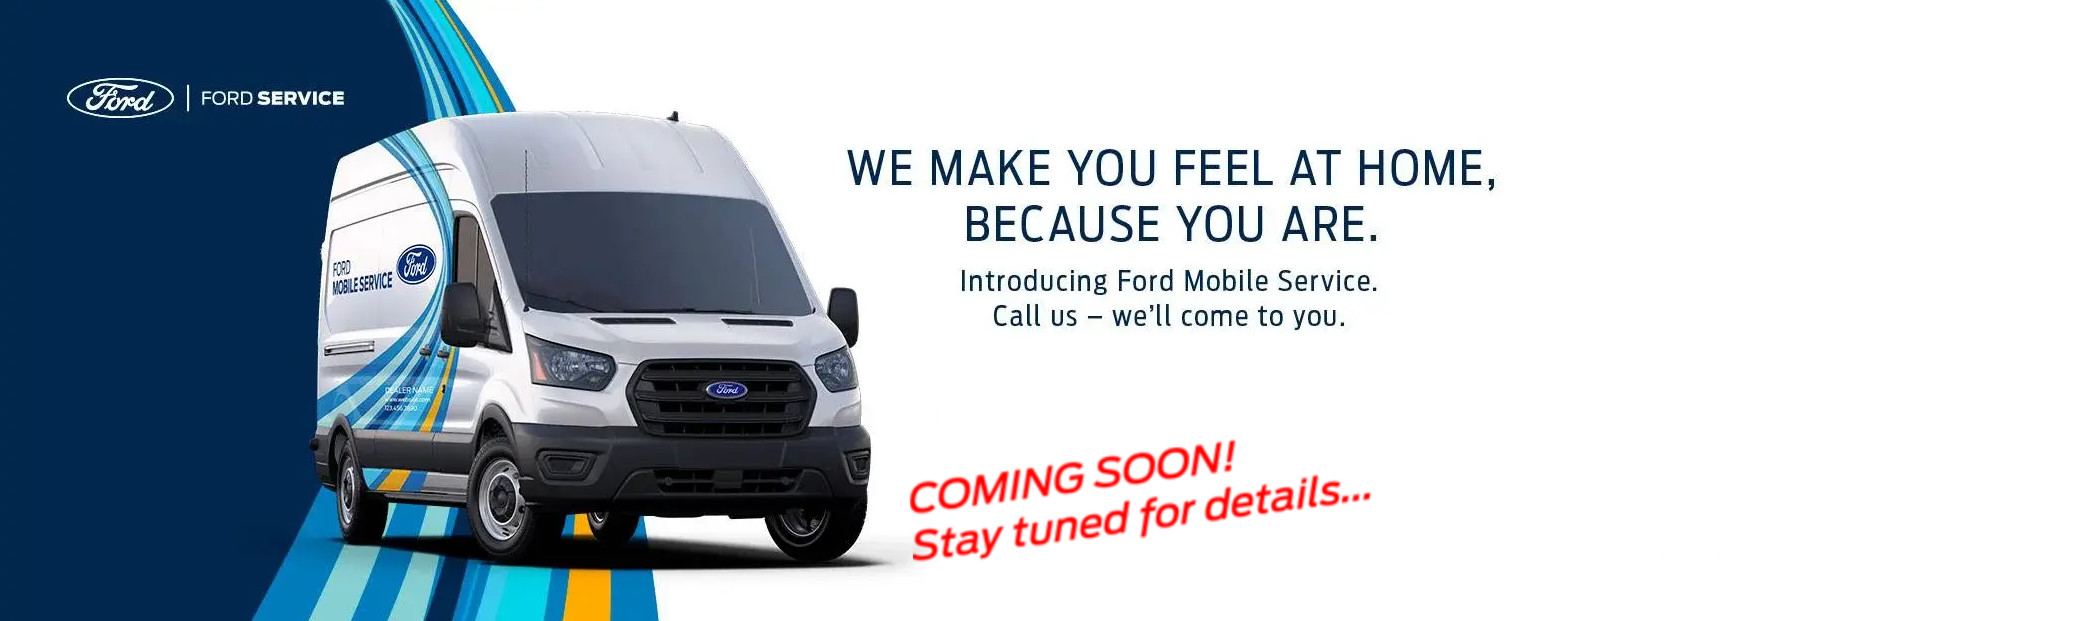 Introducing Ford Mobile Service. Call us - we'll come to you.